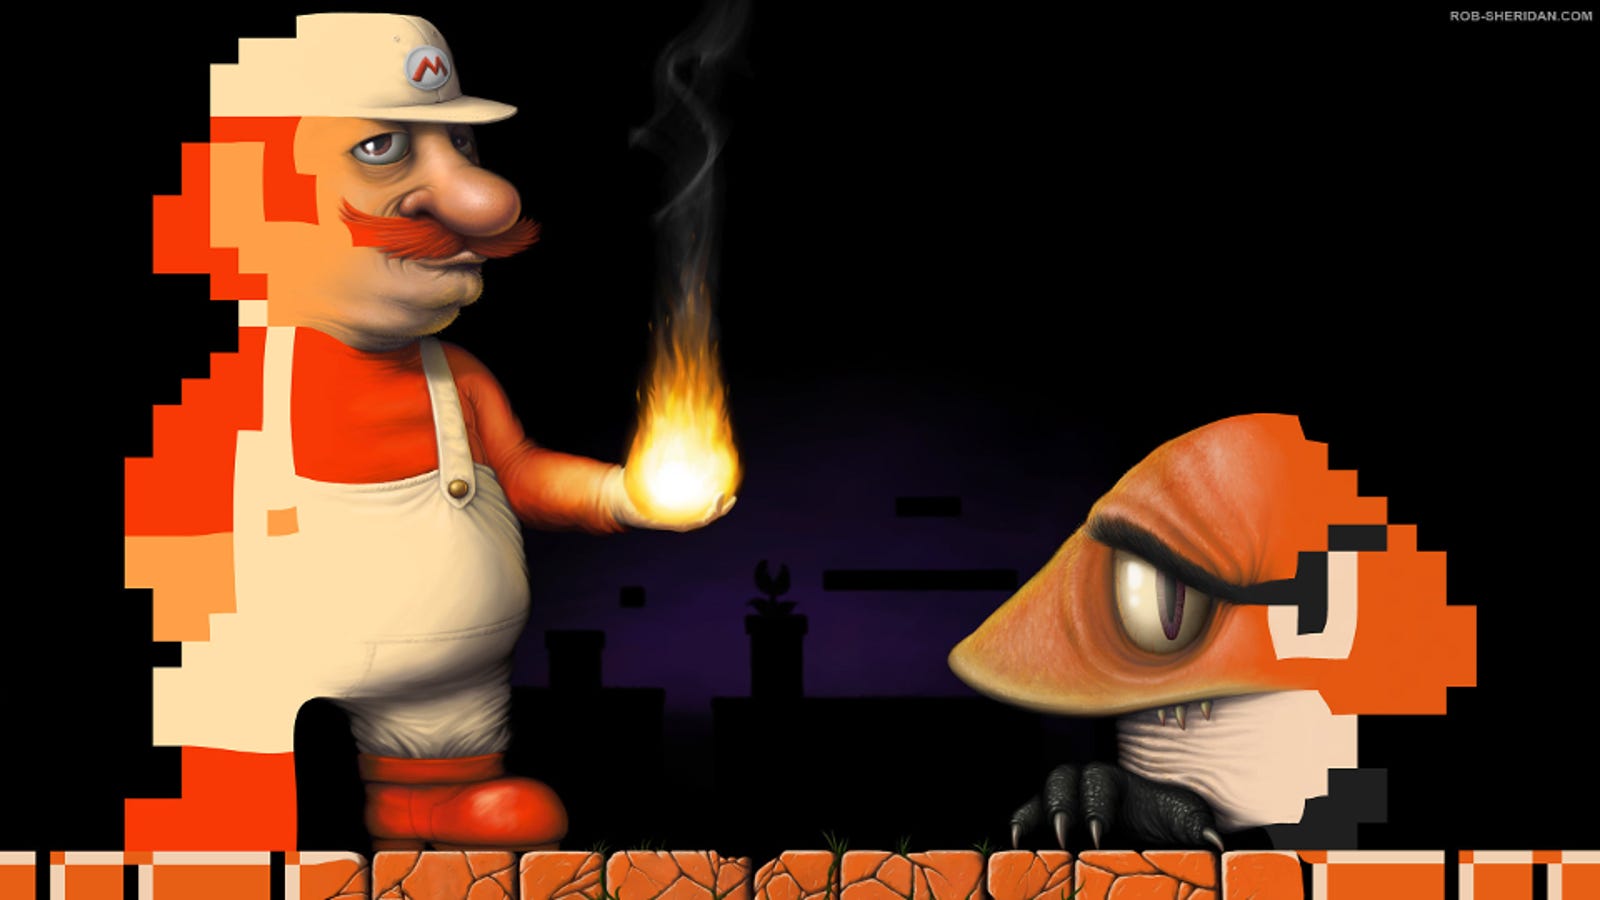 Now This Would've Made For A Great Mario Movie